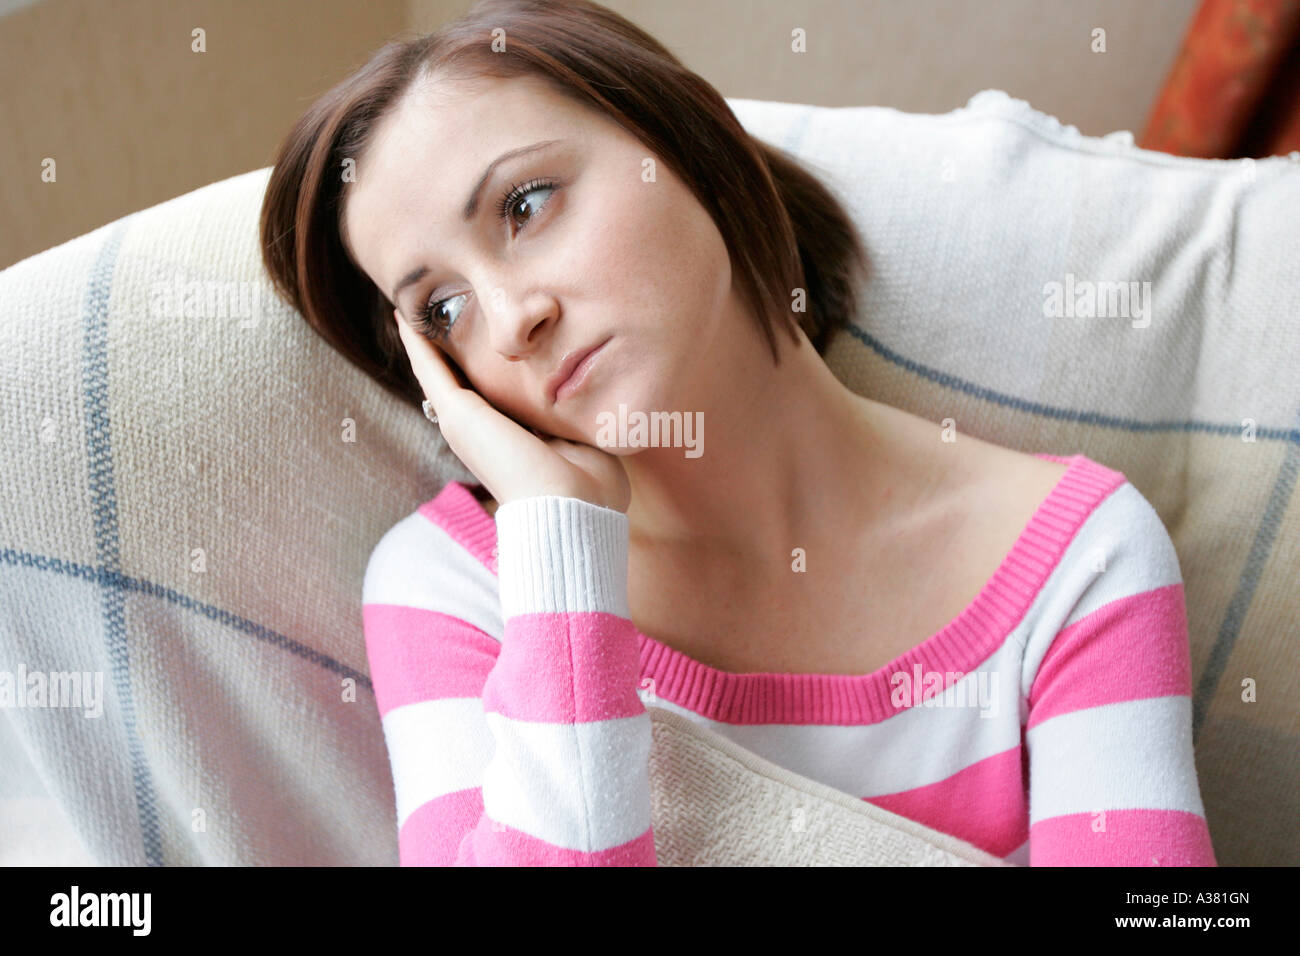 woman with head in hands Stock Photo